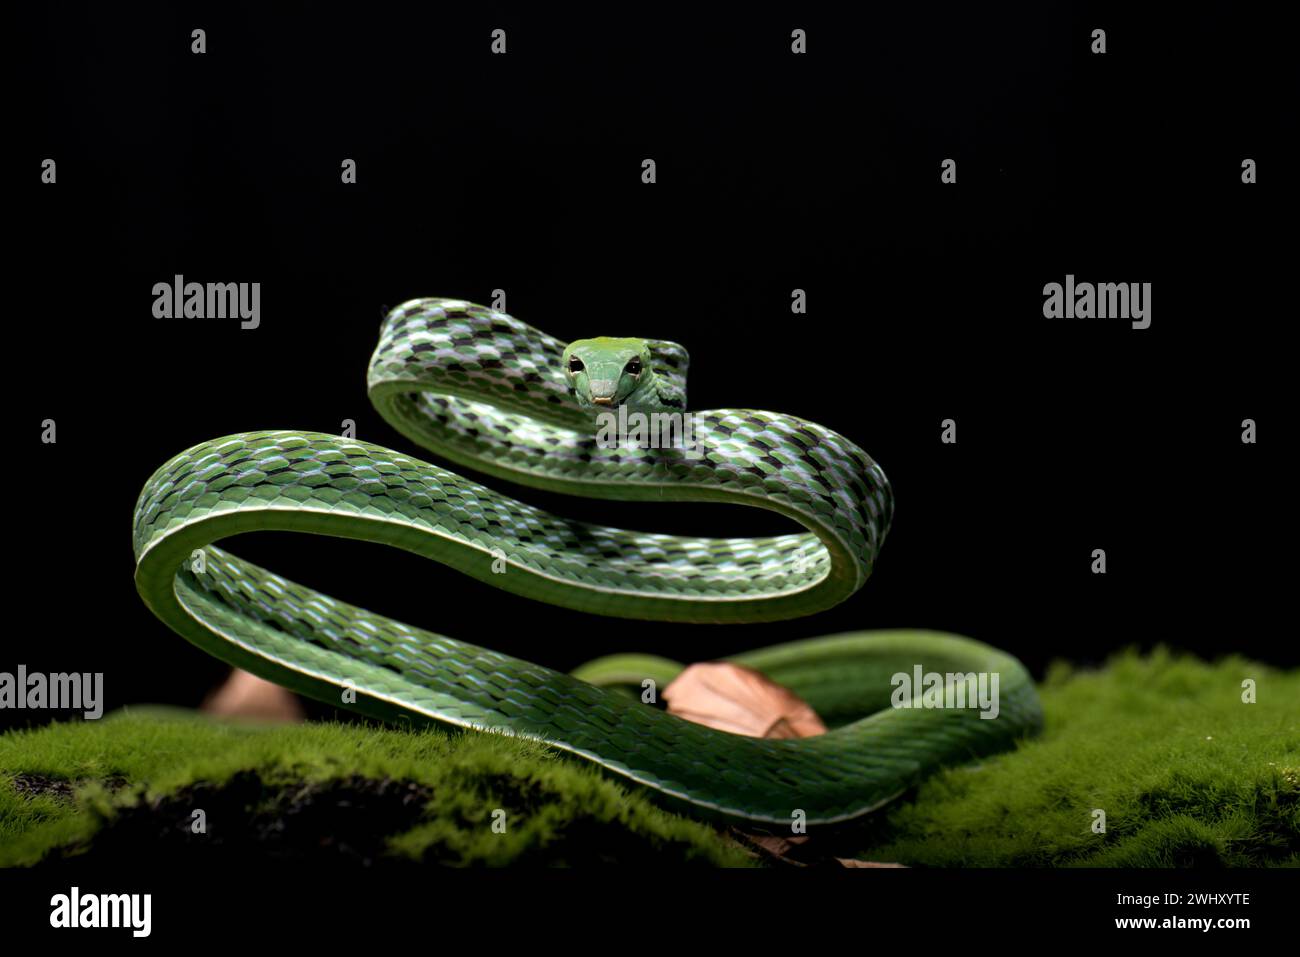 Close up photo of Asian vine snake in black background Stock Photo